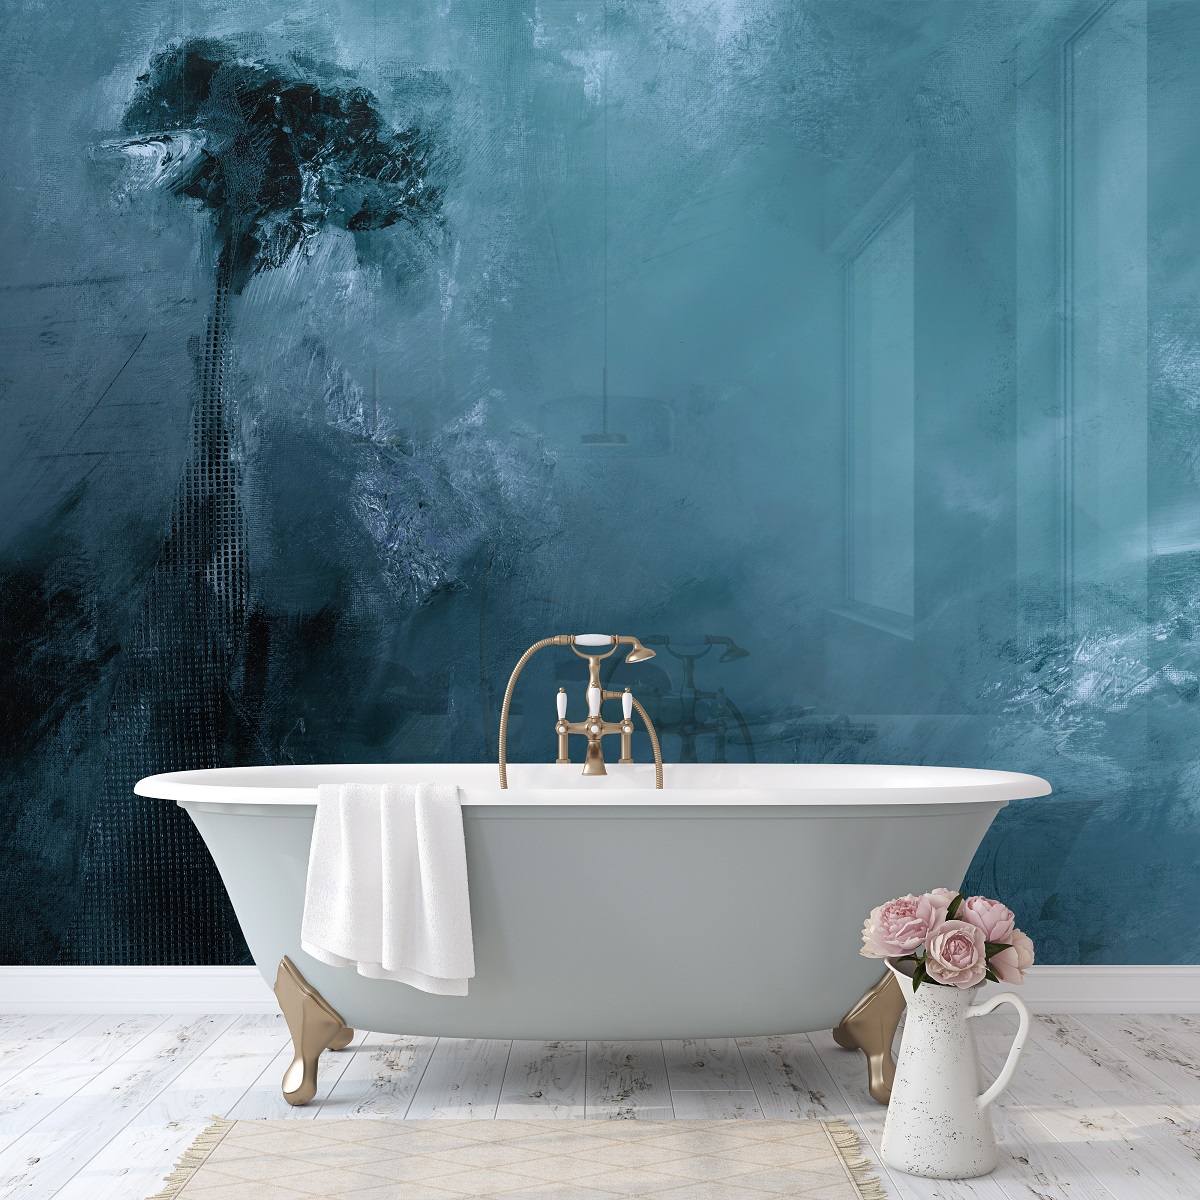 freestanding bath with full wall panel behind in ocean blues by Red dog Glass Design